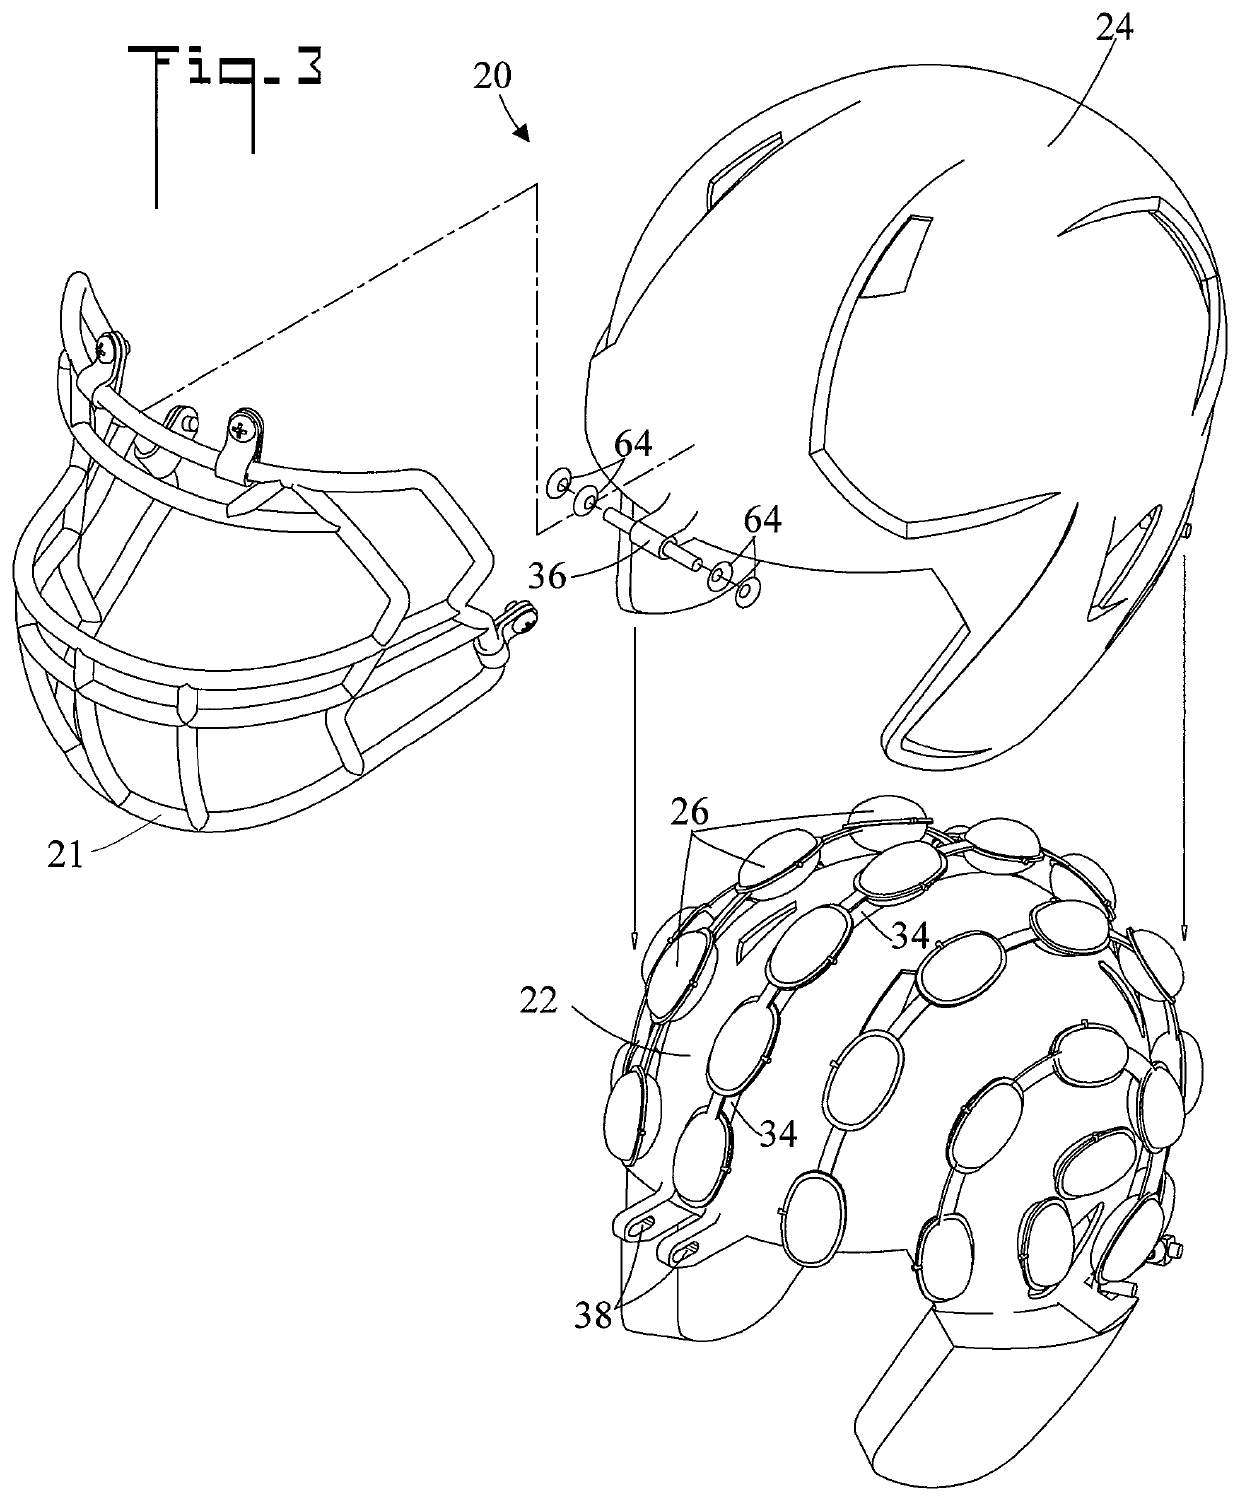 Apparatus for protecting the head of a person from an external force